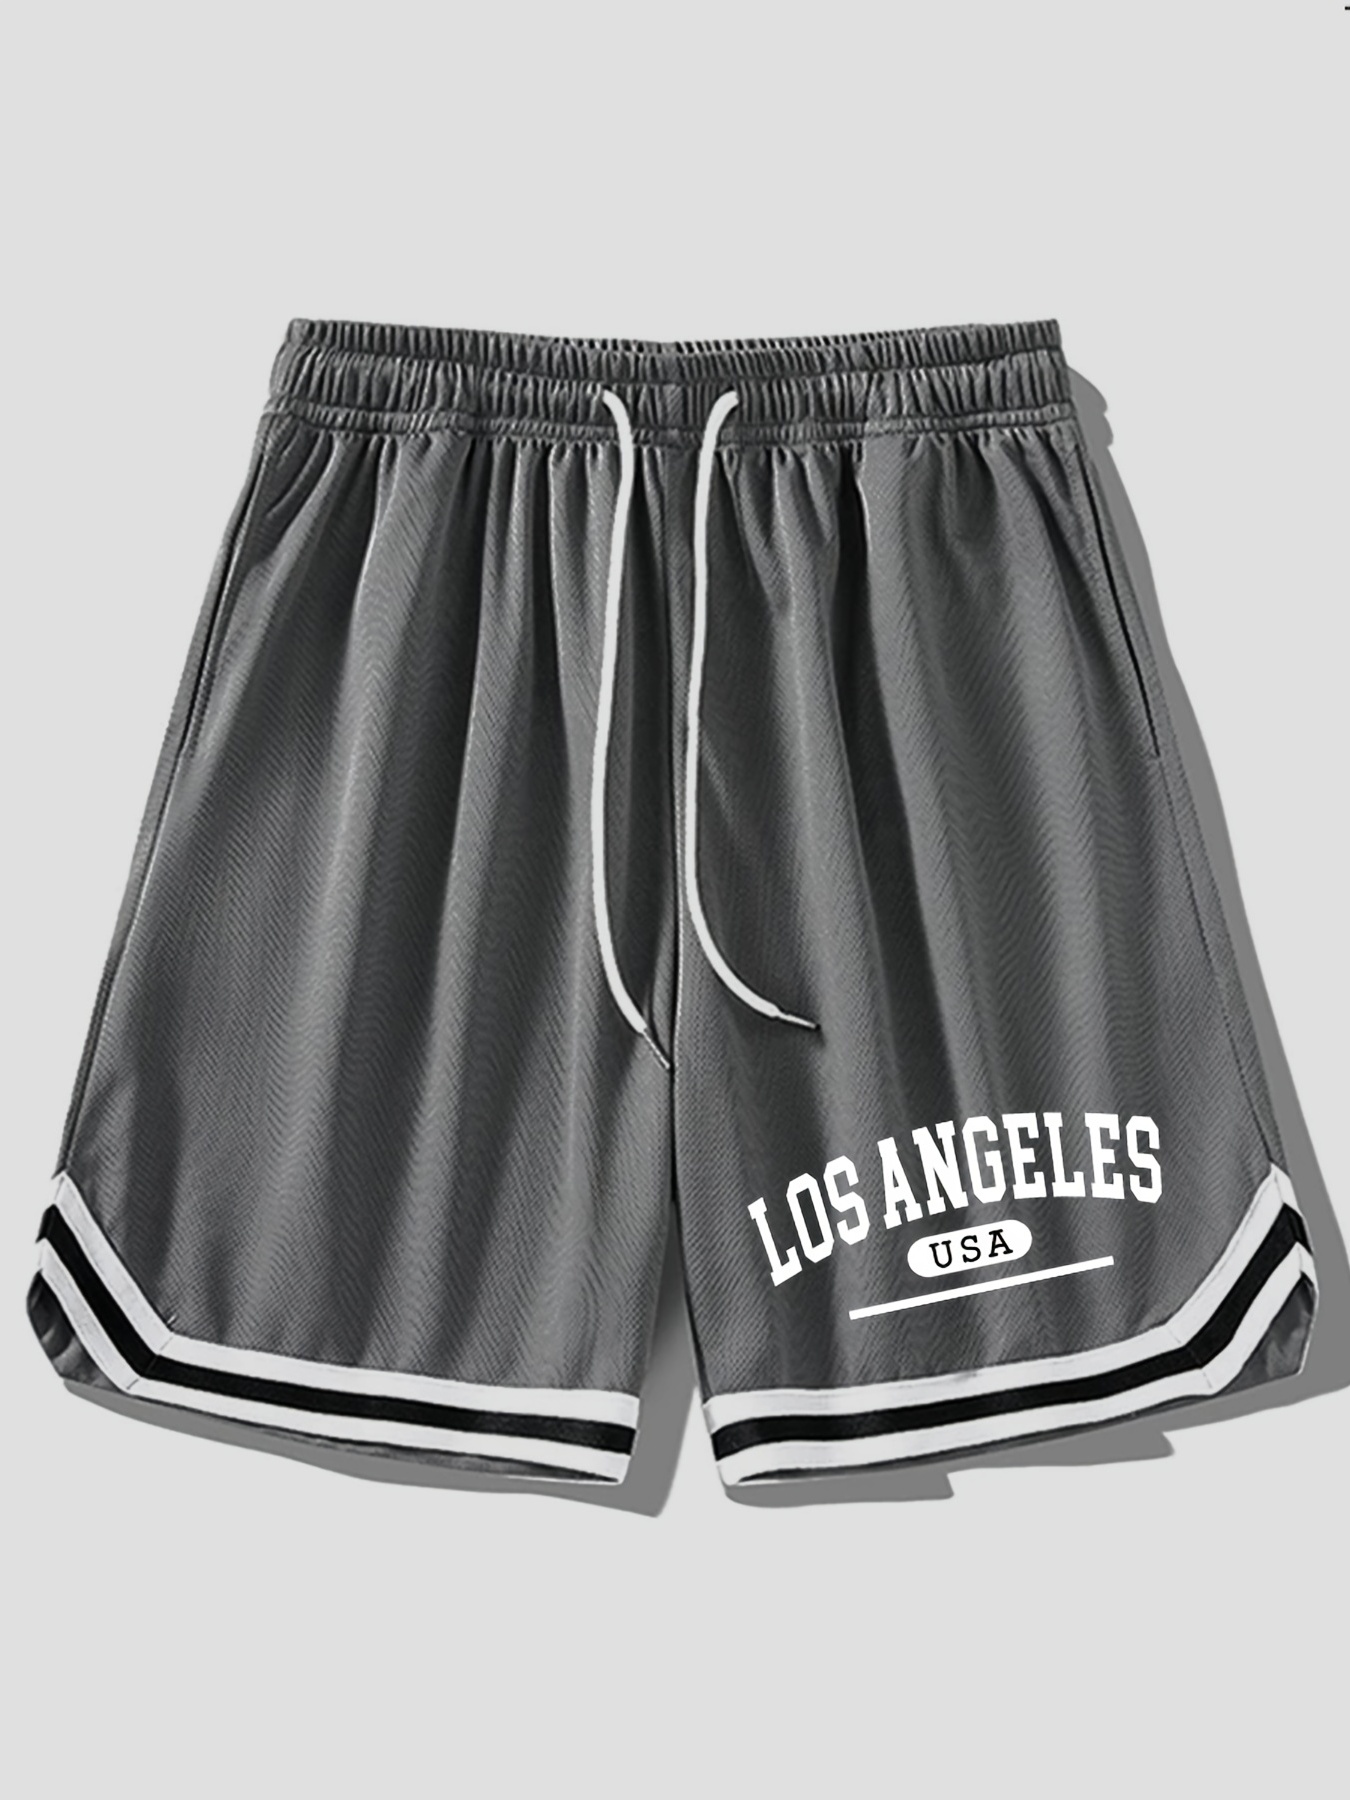 Mens NBA Los Angeles Lakers Shorts Black With Pinstripe Size Medium for sale  online